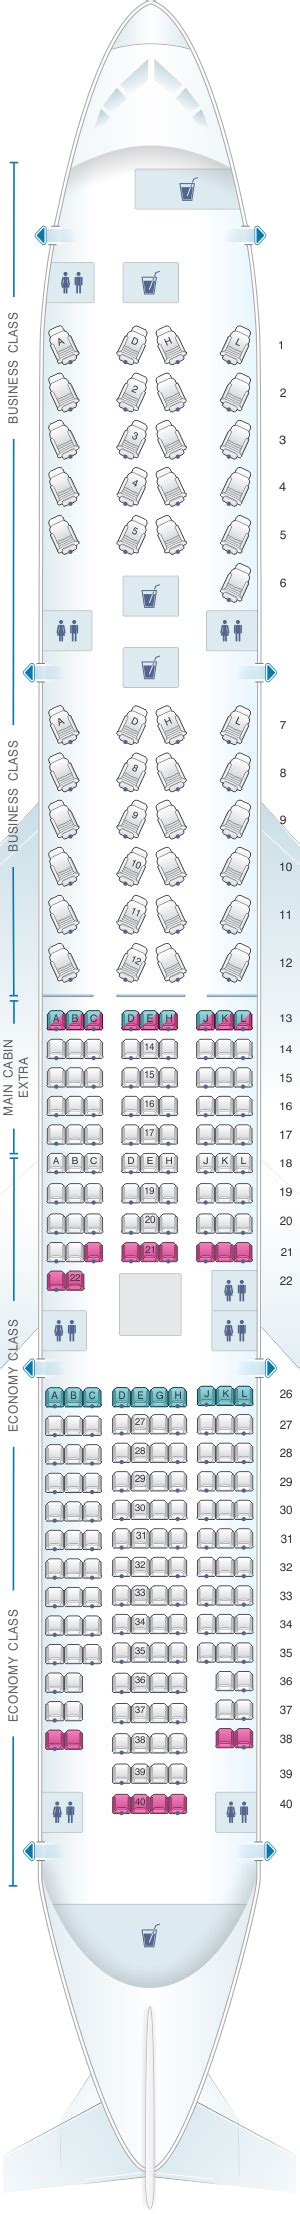 Boeing Er Seating Chart American Airlines Elcho Table My Xxx Hot Girl